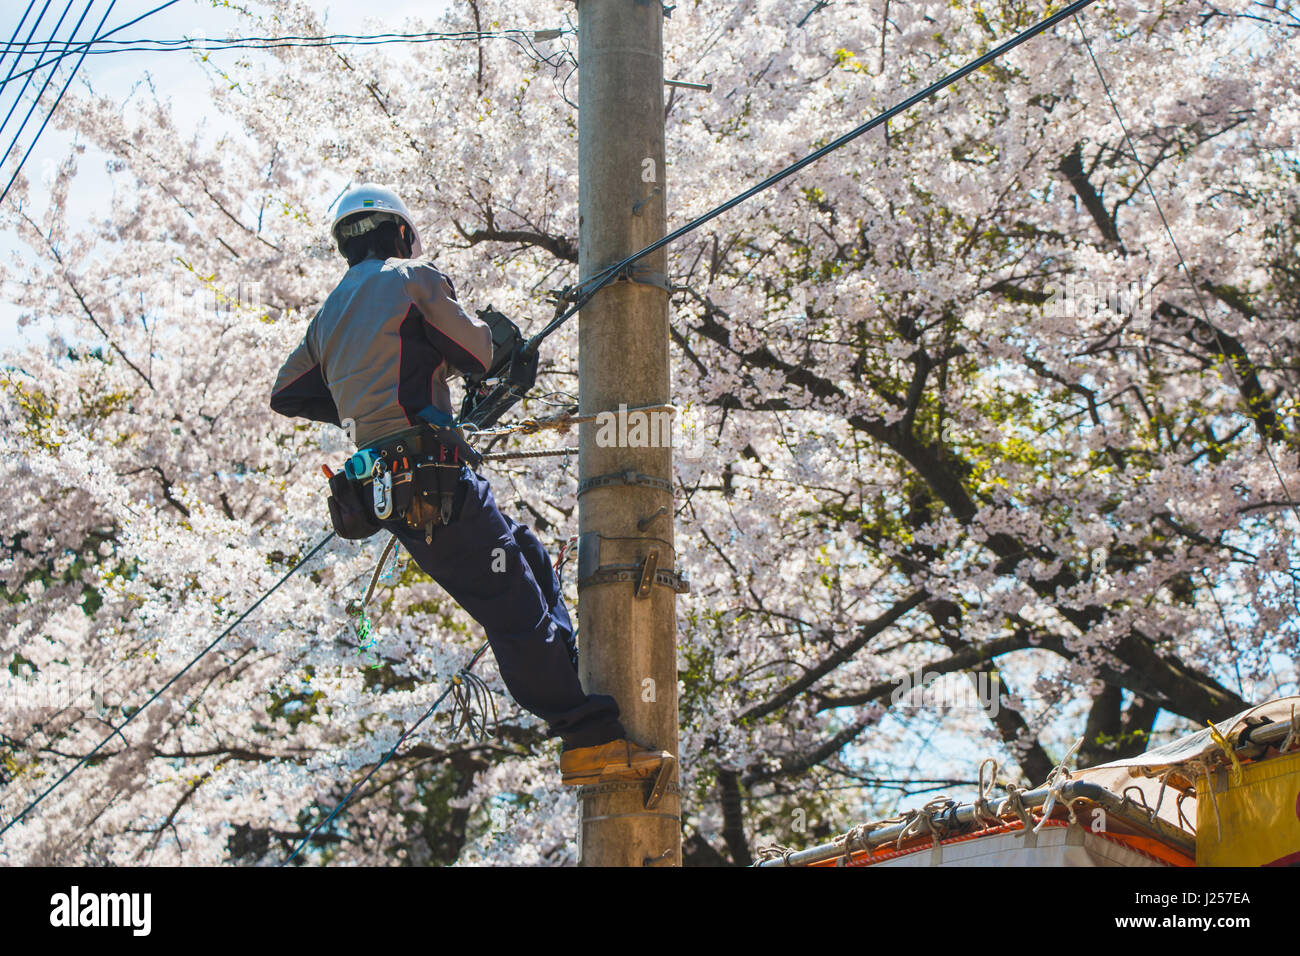 A worker that repairing electric cable at a Hanami festival in cherry blossom background, Japan Stock Photo